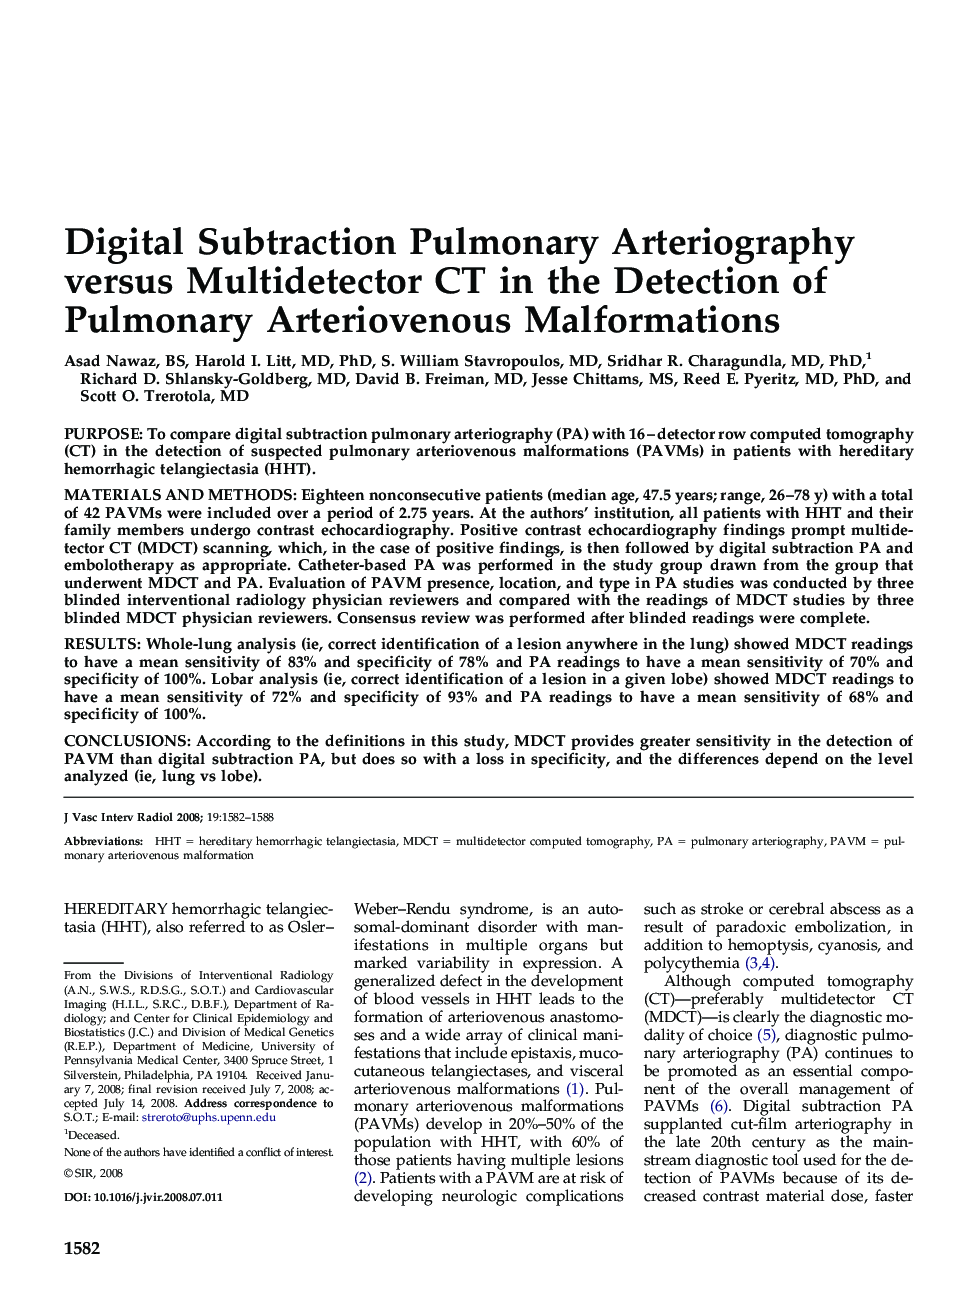 Digital Subtraction Pulmonary Arteriography versus Multidetector CT in the Detection of Pulmonary Arteriovenous Malformations